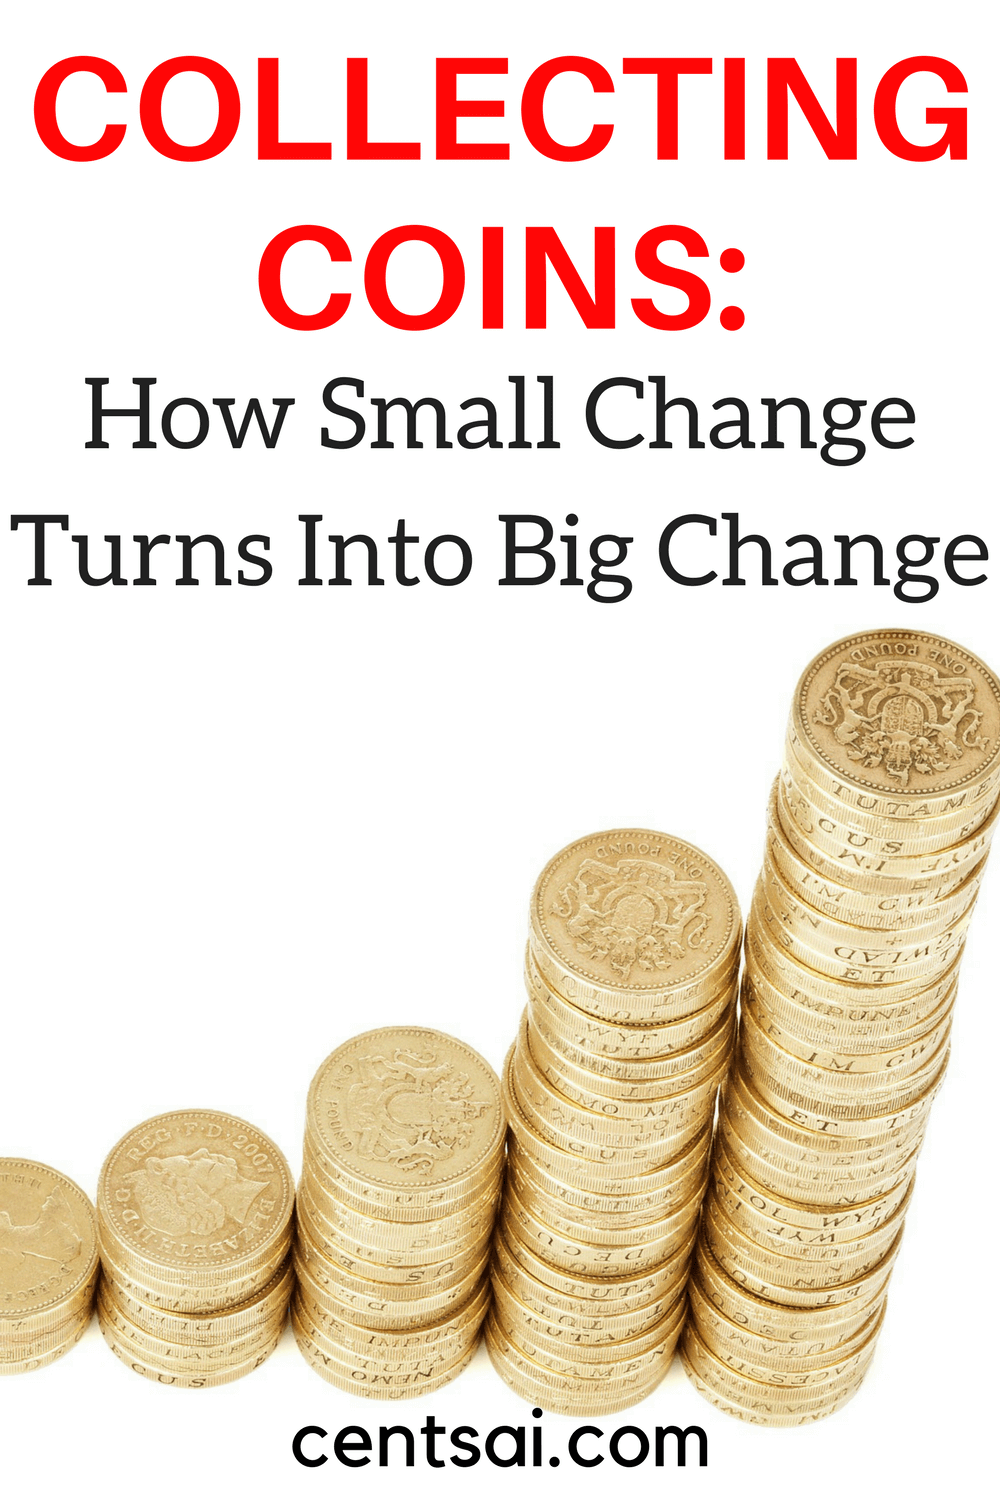 Collecting Coins: How Small Change Turns Into Big Change. If you want real change, start funneling it into glass jars. You'd be amazed at how much you can save by holding onto your spare change.